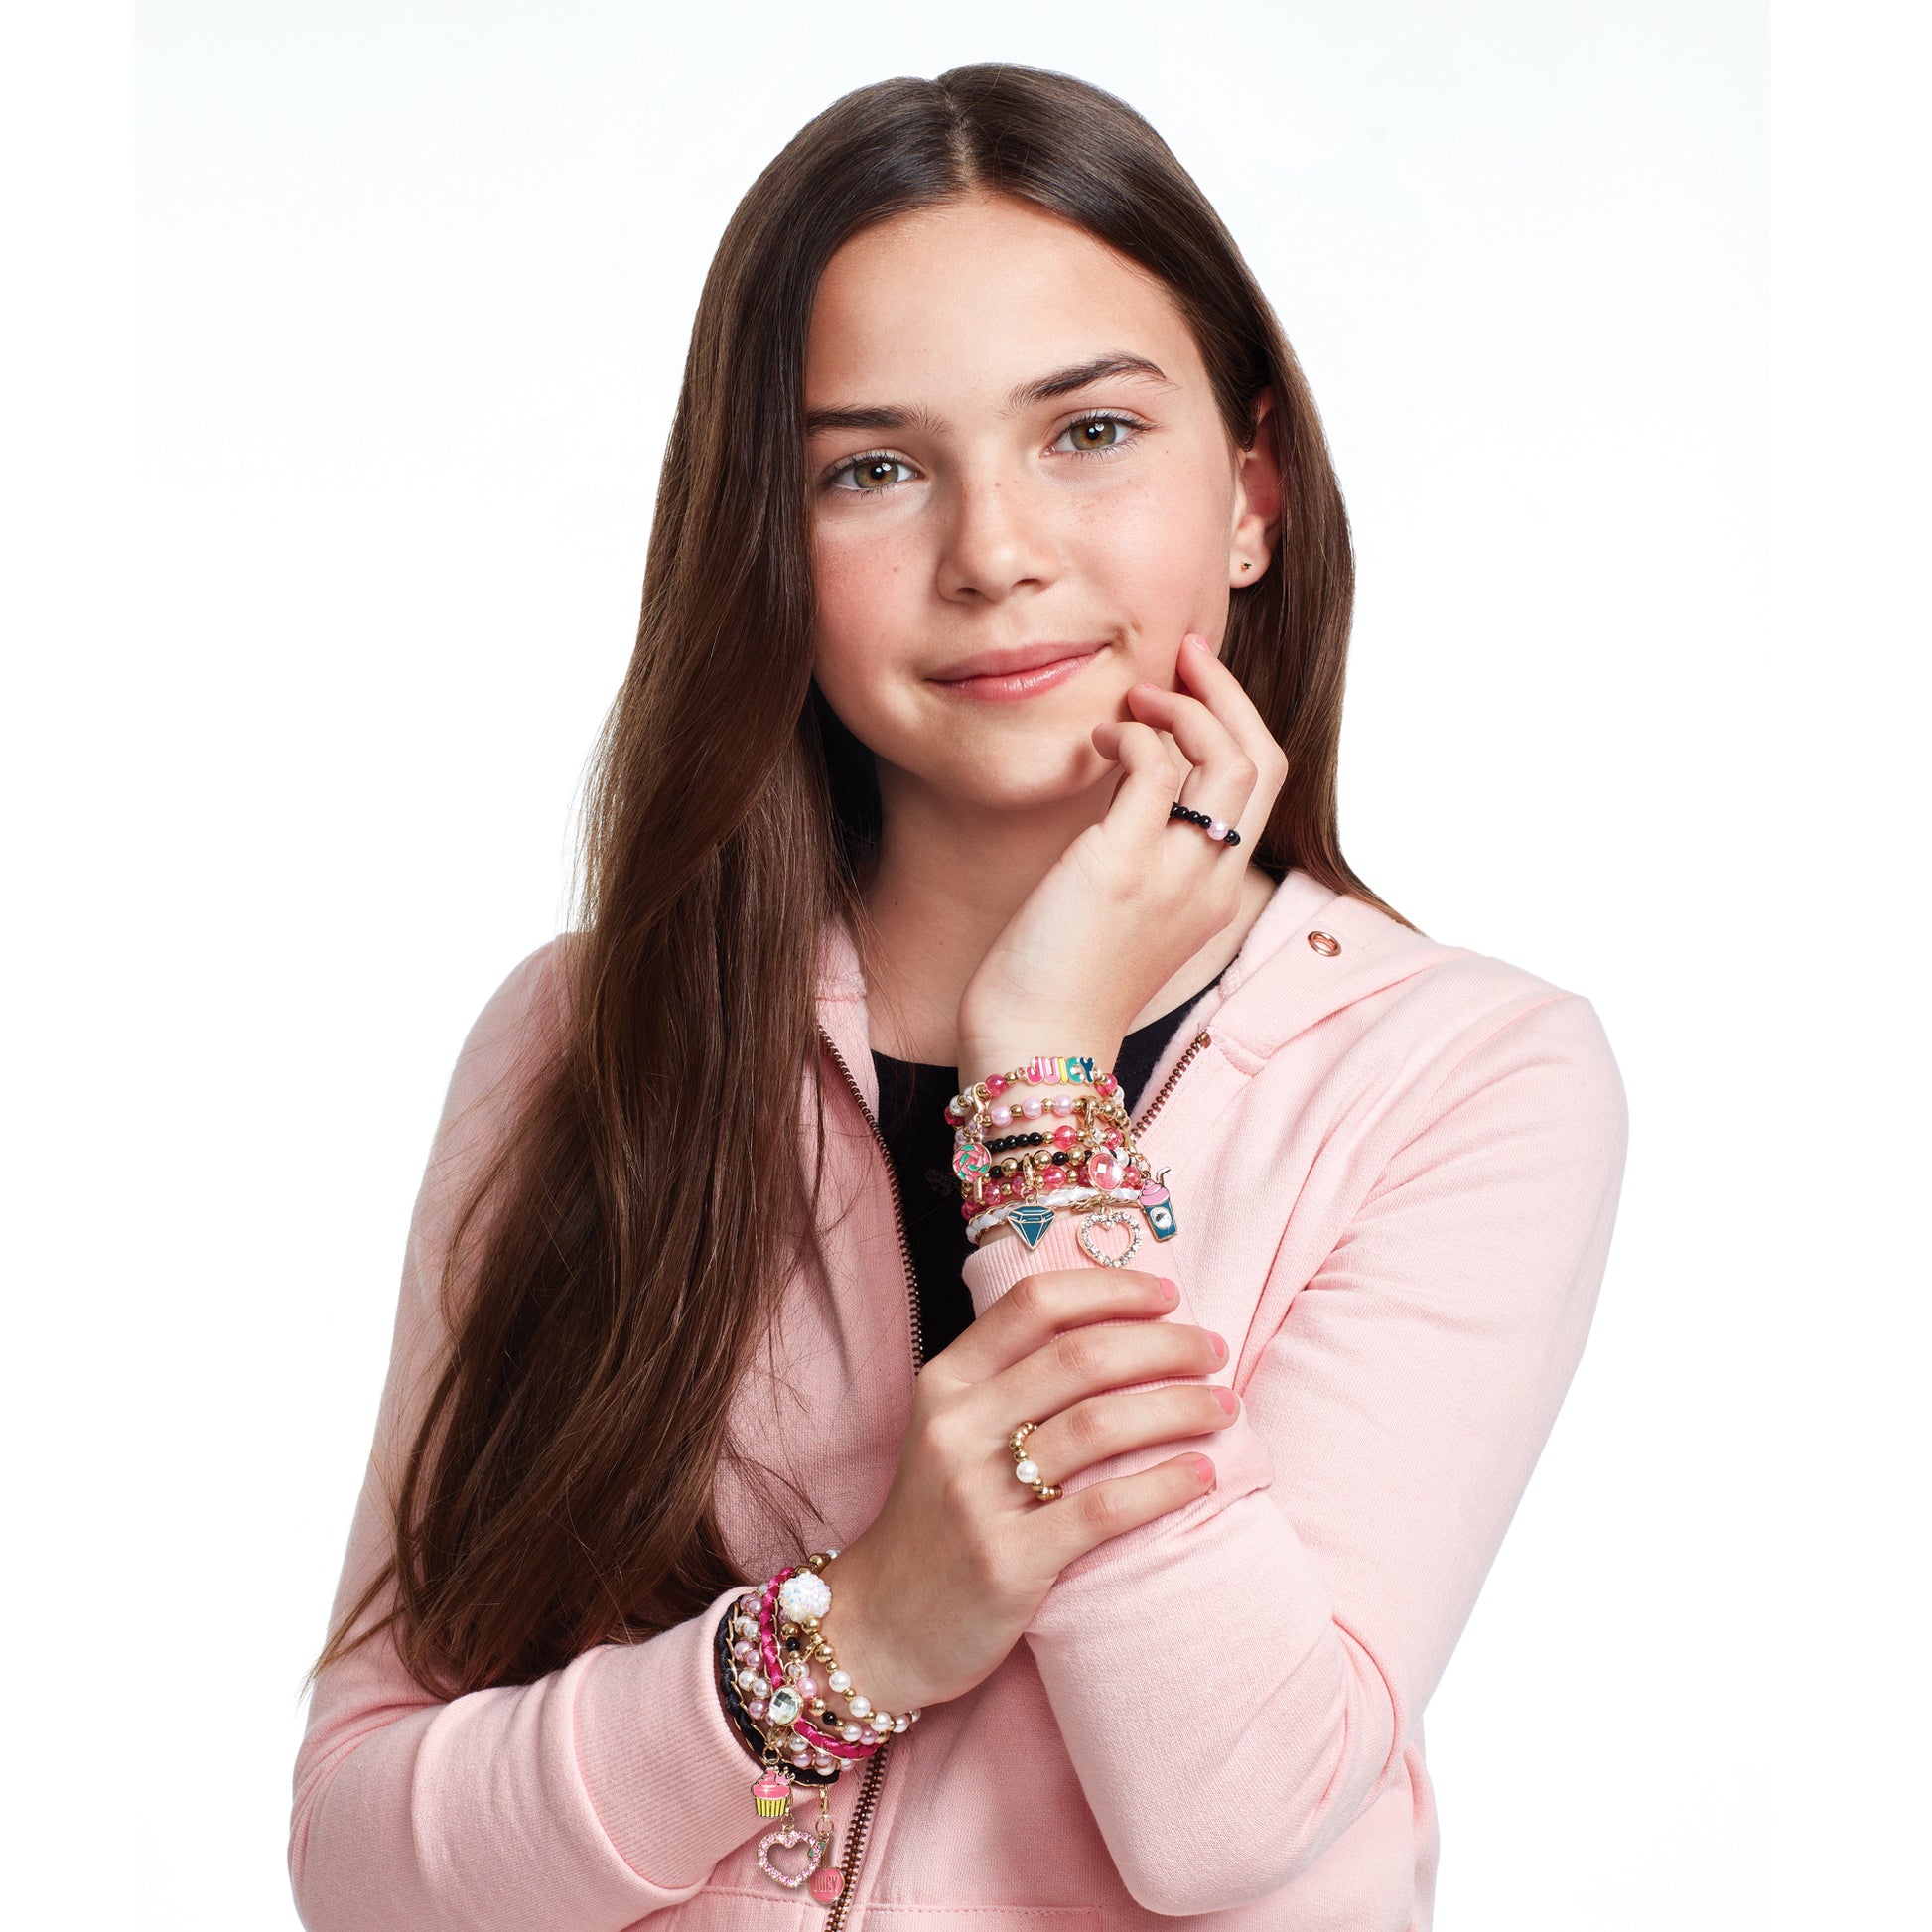 Juicy Couture™ Pink & Precious Bracelets – Make It Real